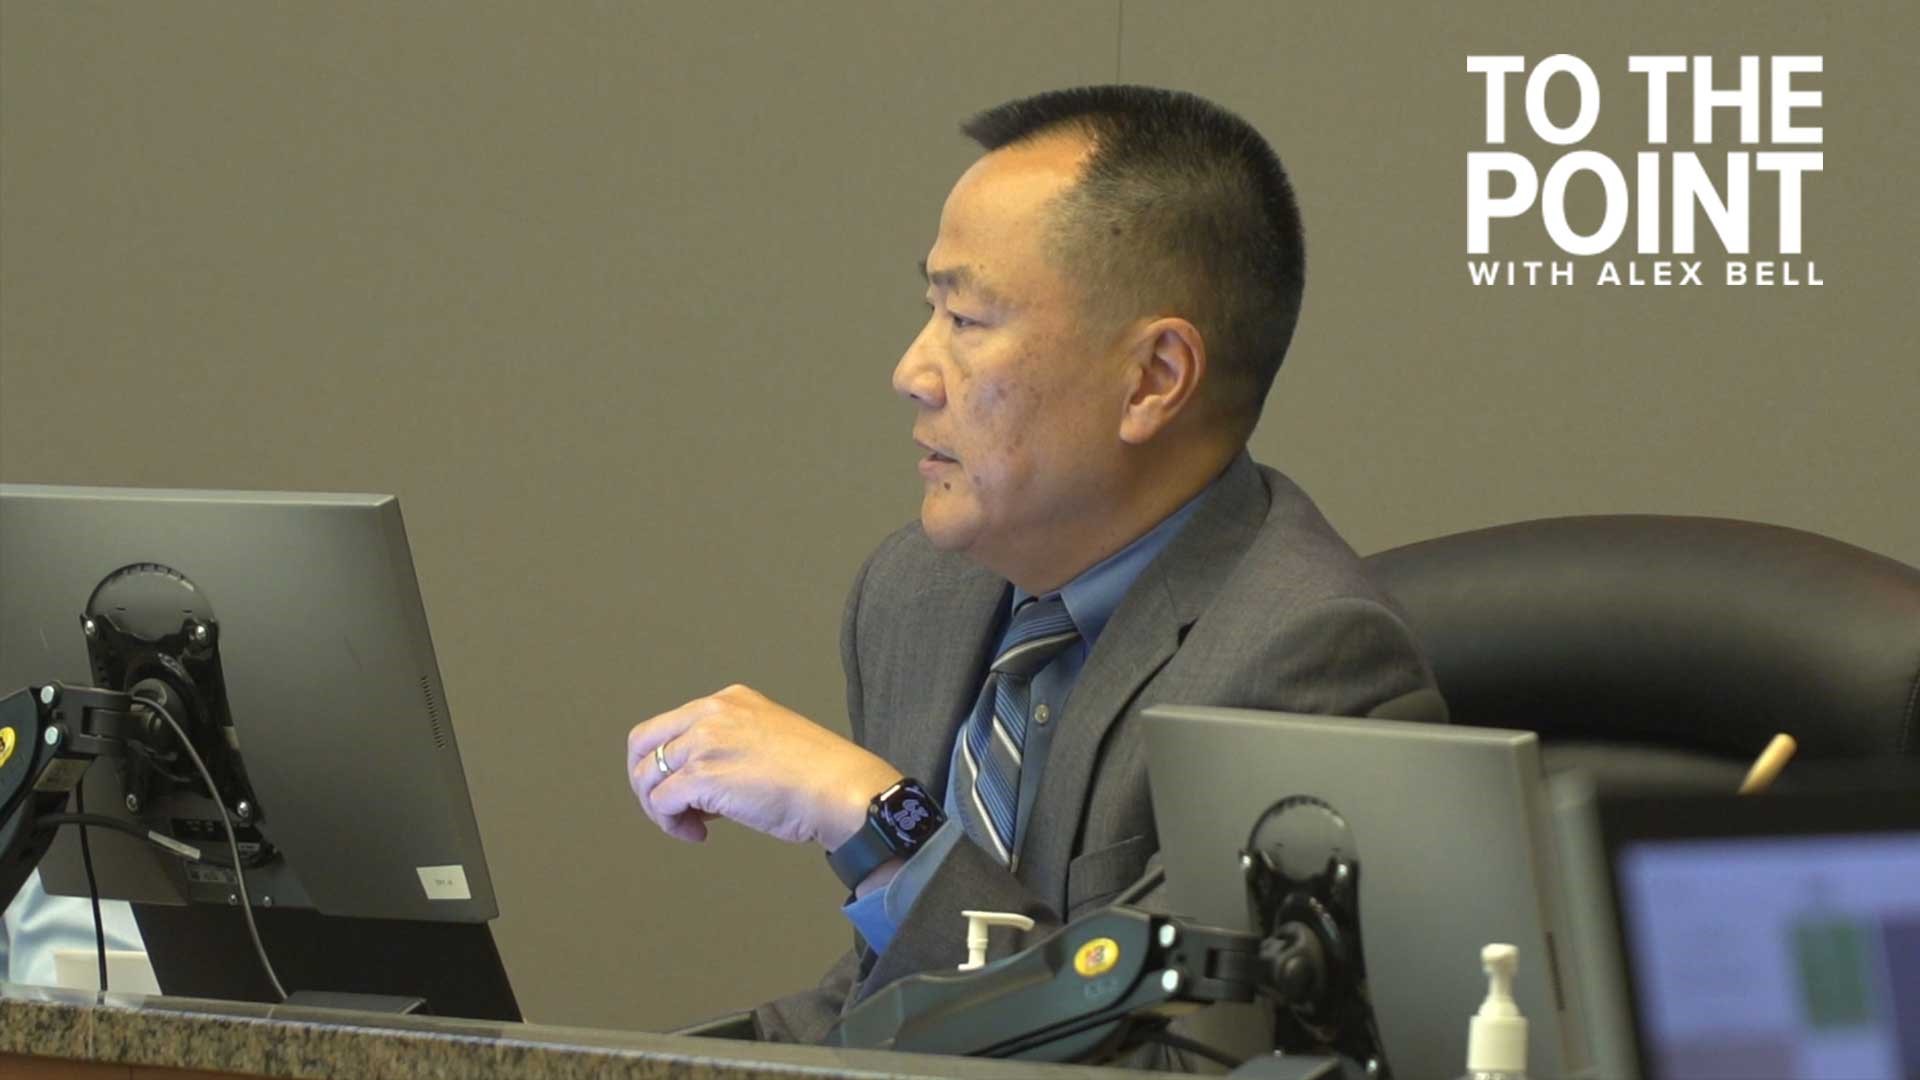 If approved, City Manager Howard Chan can implement new shelter sites without city council approval.